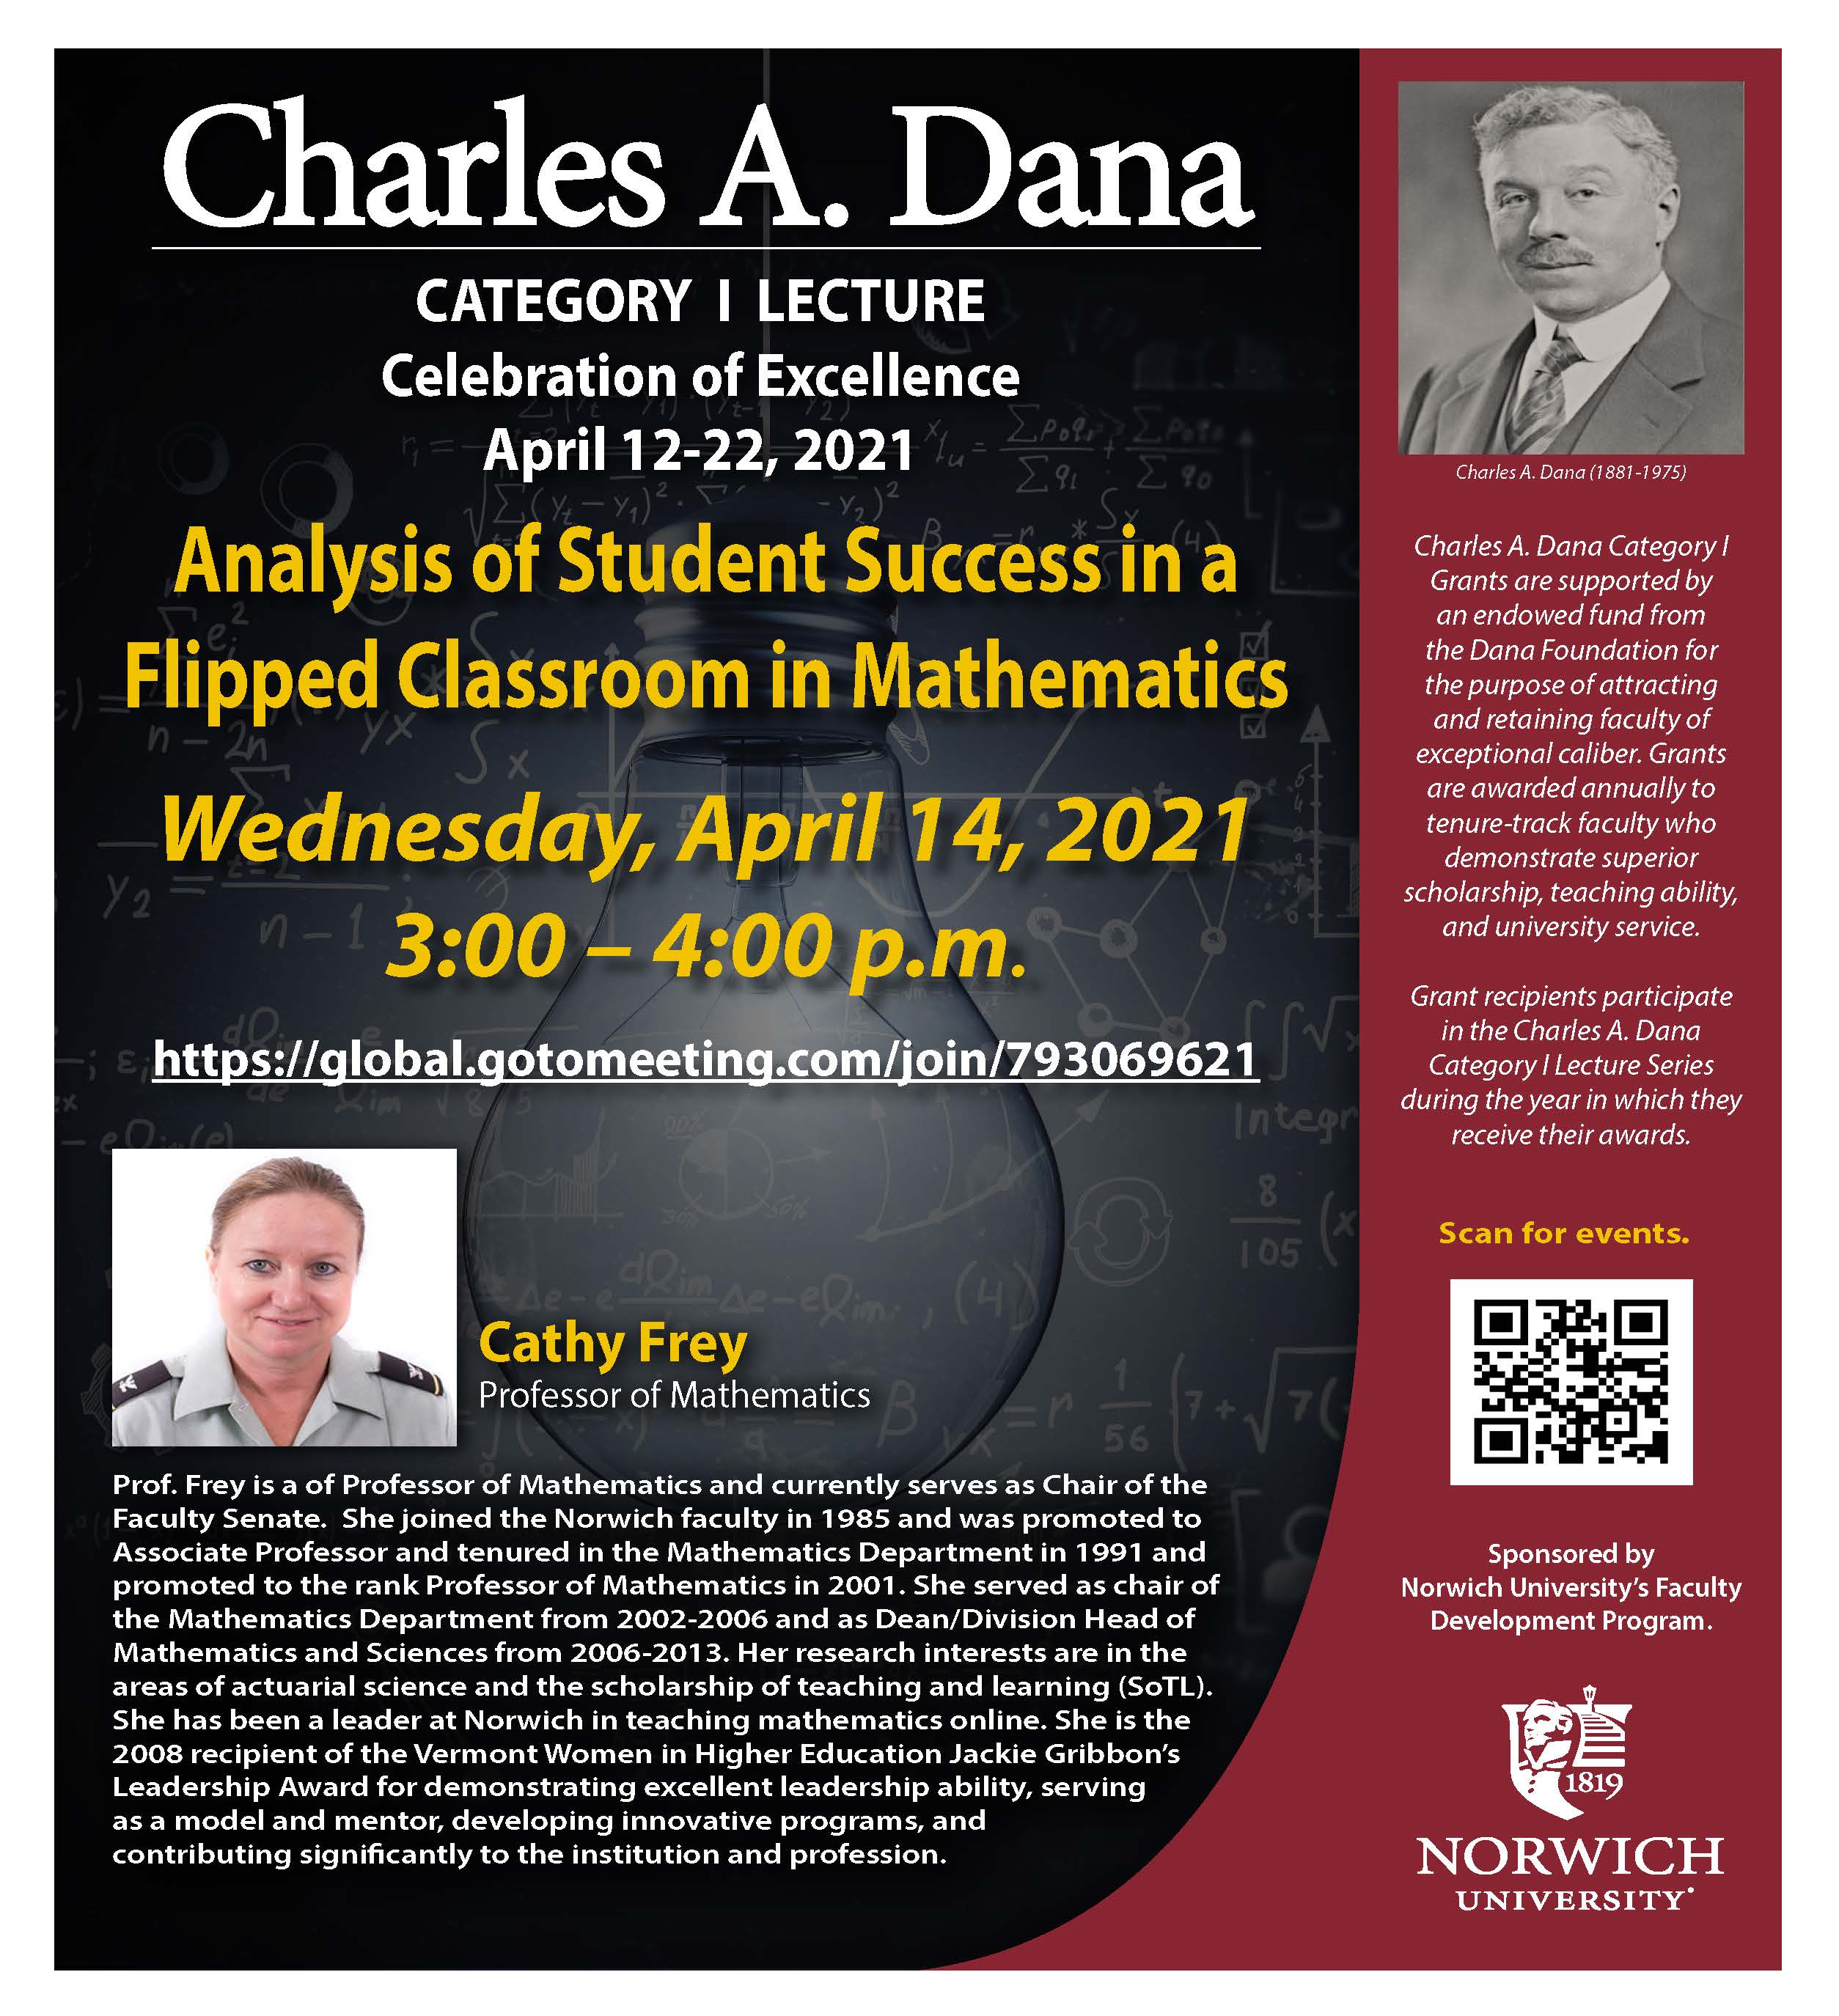 Showcase Image for Analysis of Student Success in a Flipped Classroom in Mathematics